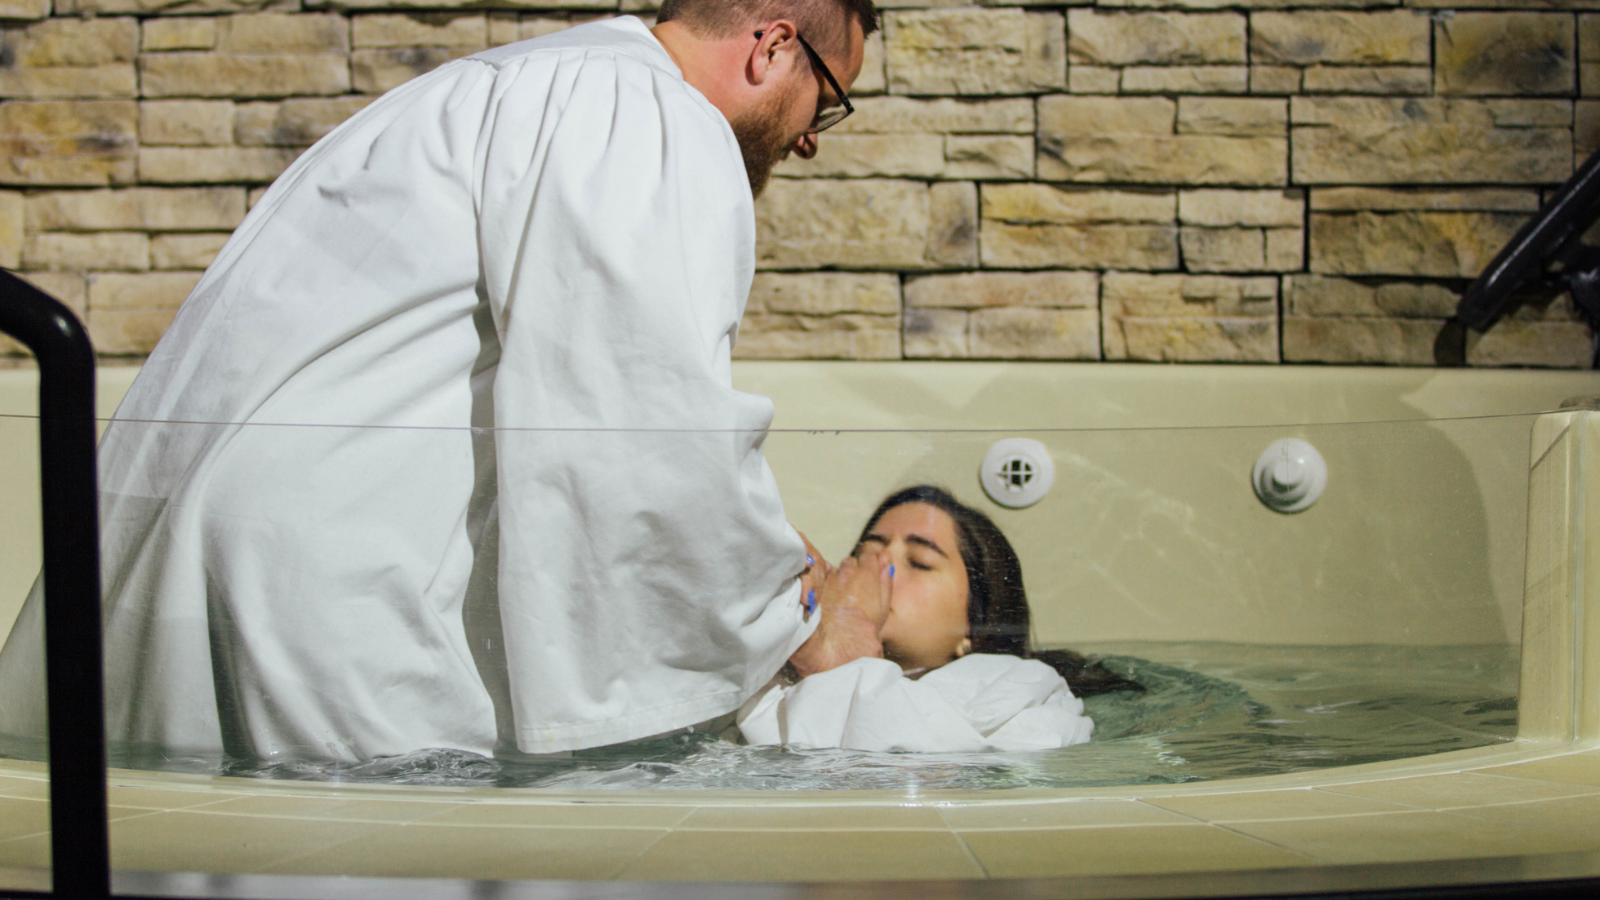 Girl being baptized in a baptismal